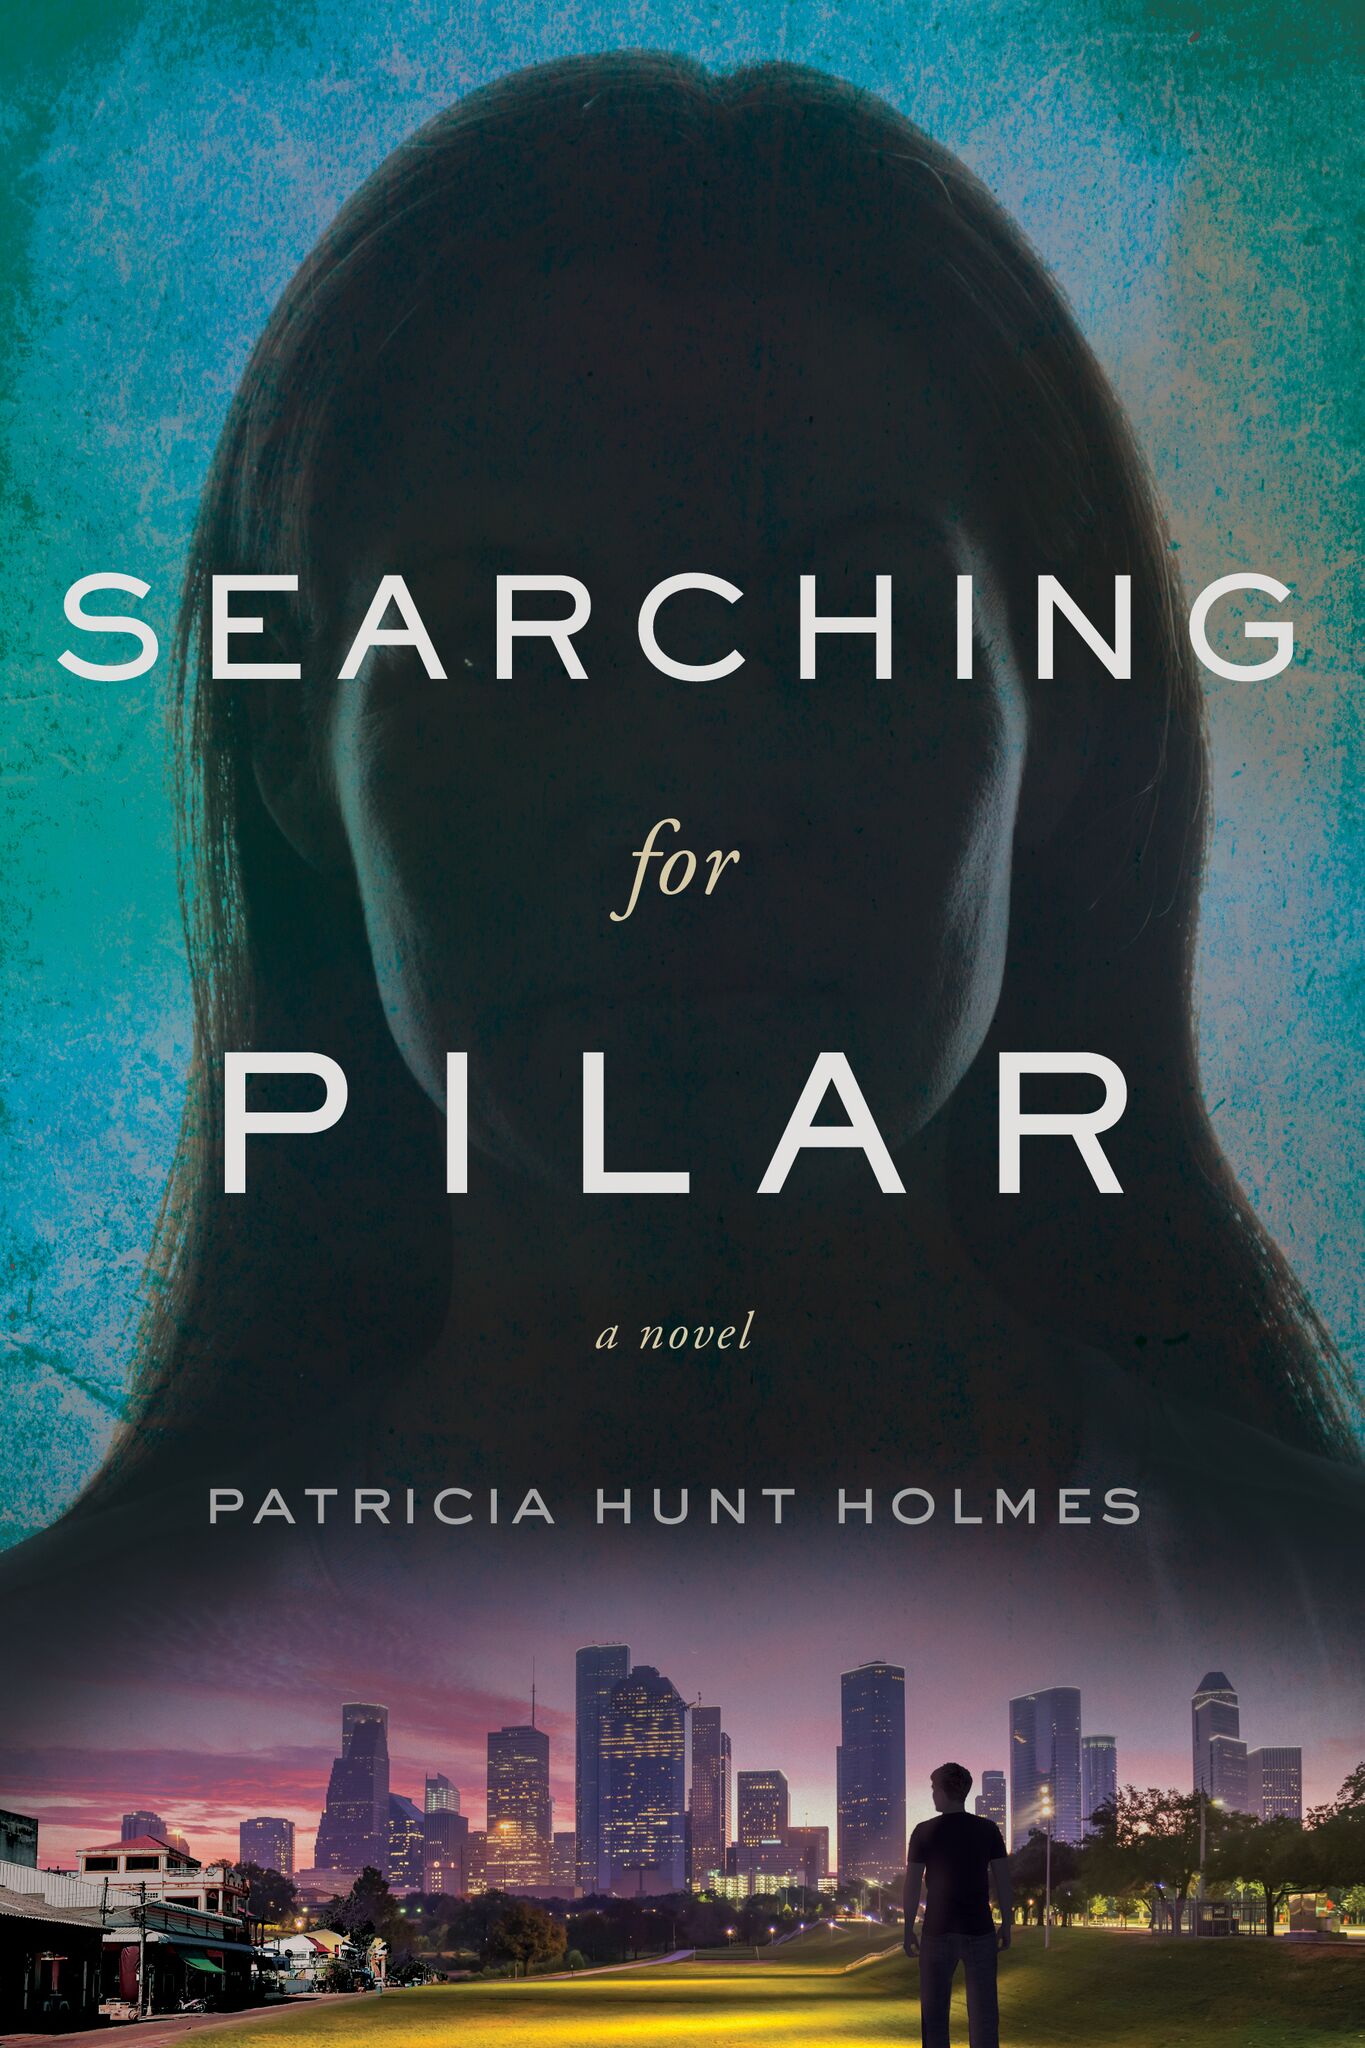 Searching for Pilar